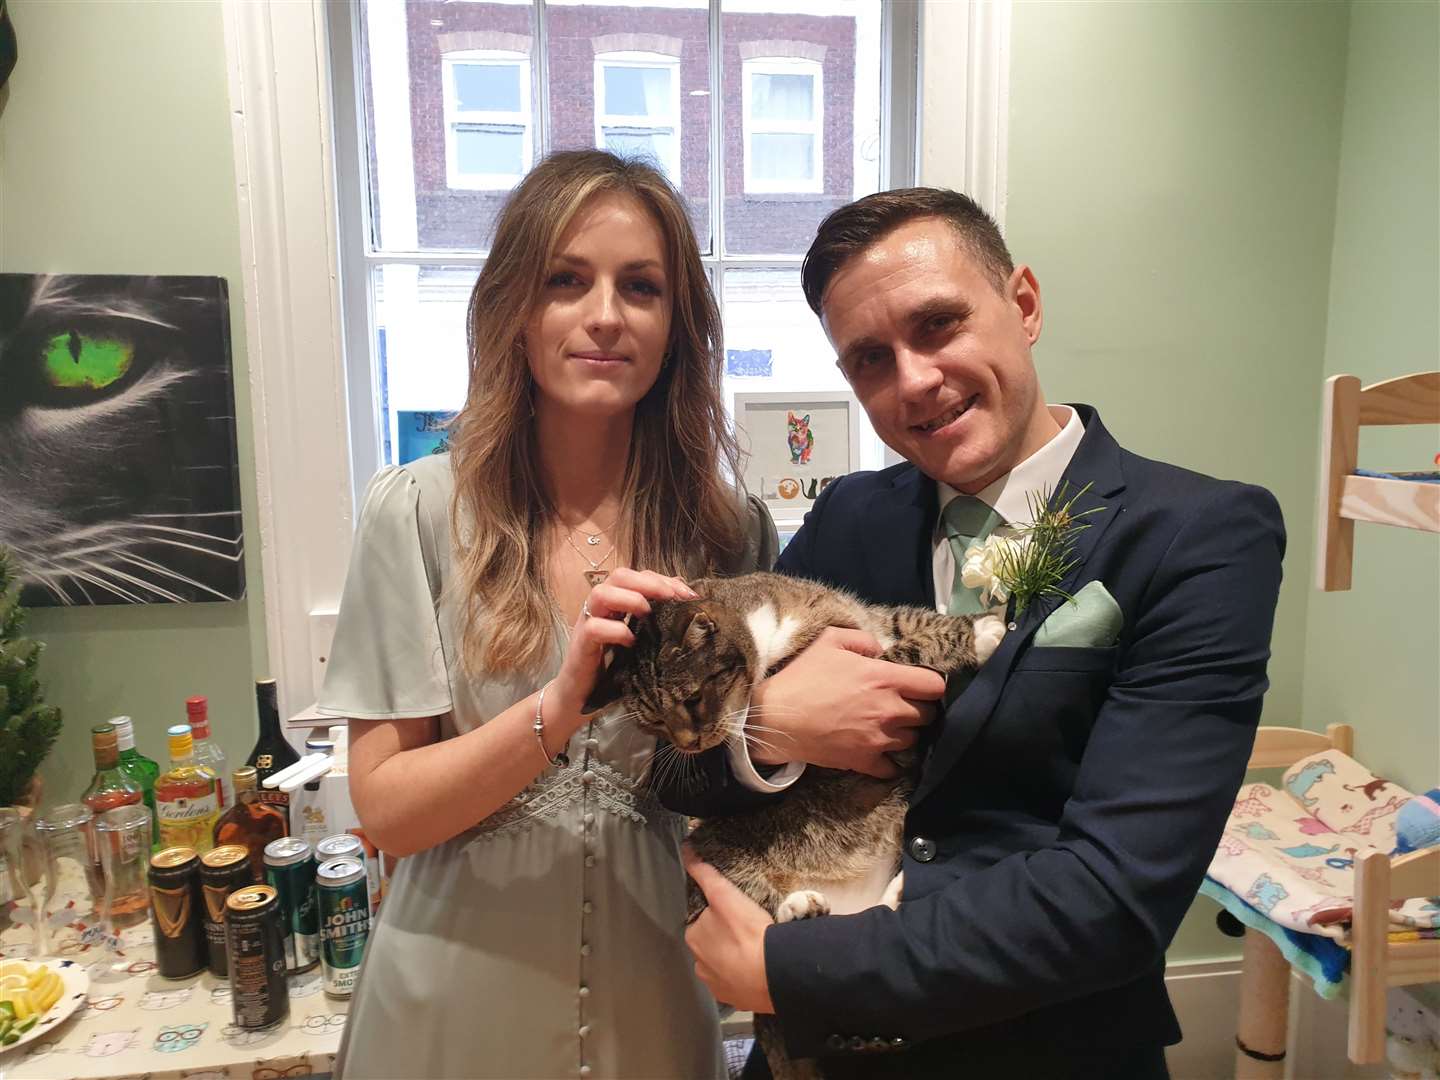 Newlyweds Mark and Kara Cowell-Young previously had their wedding reception at the café